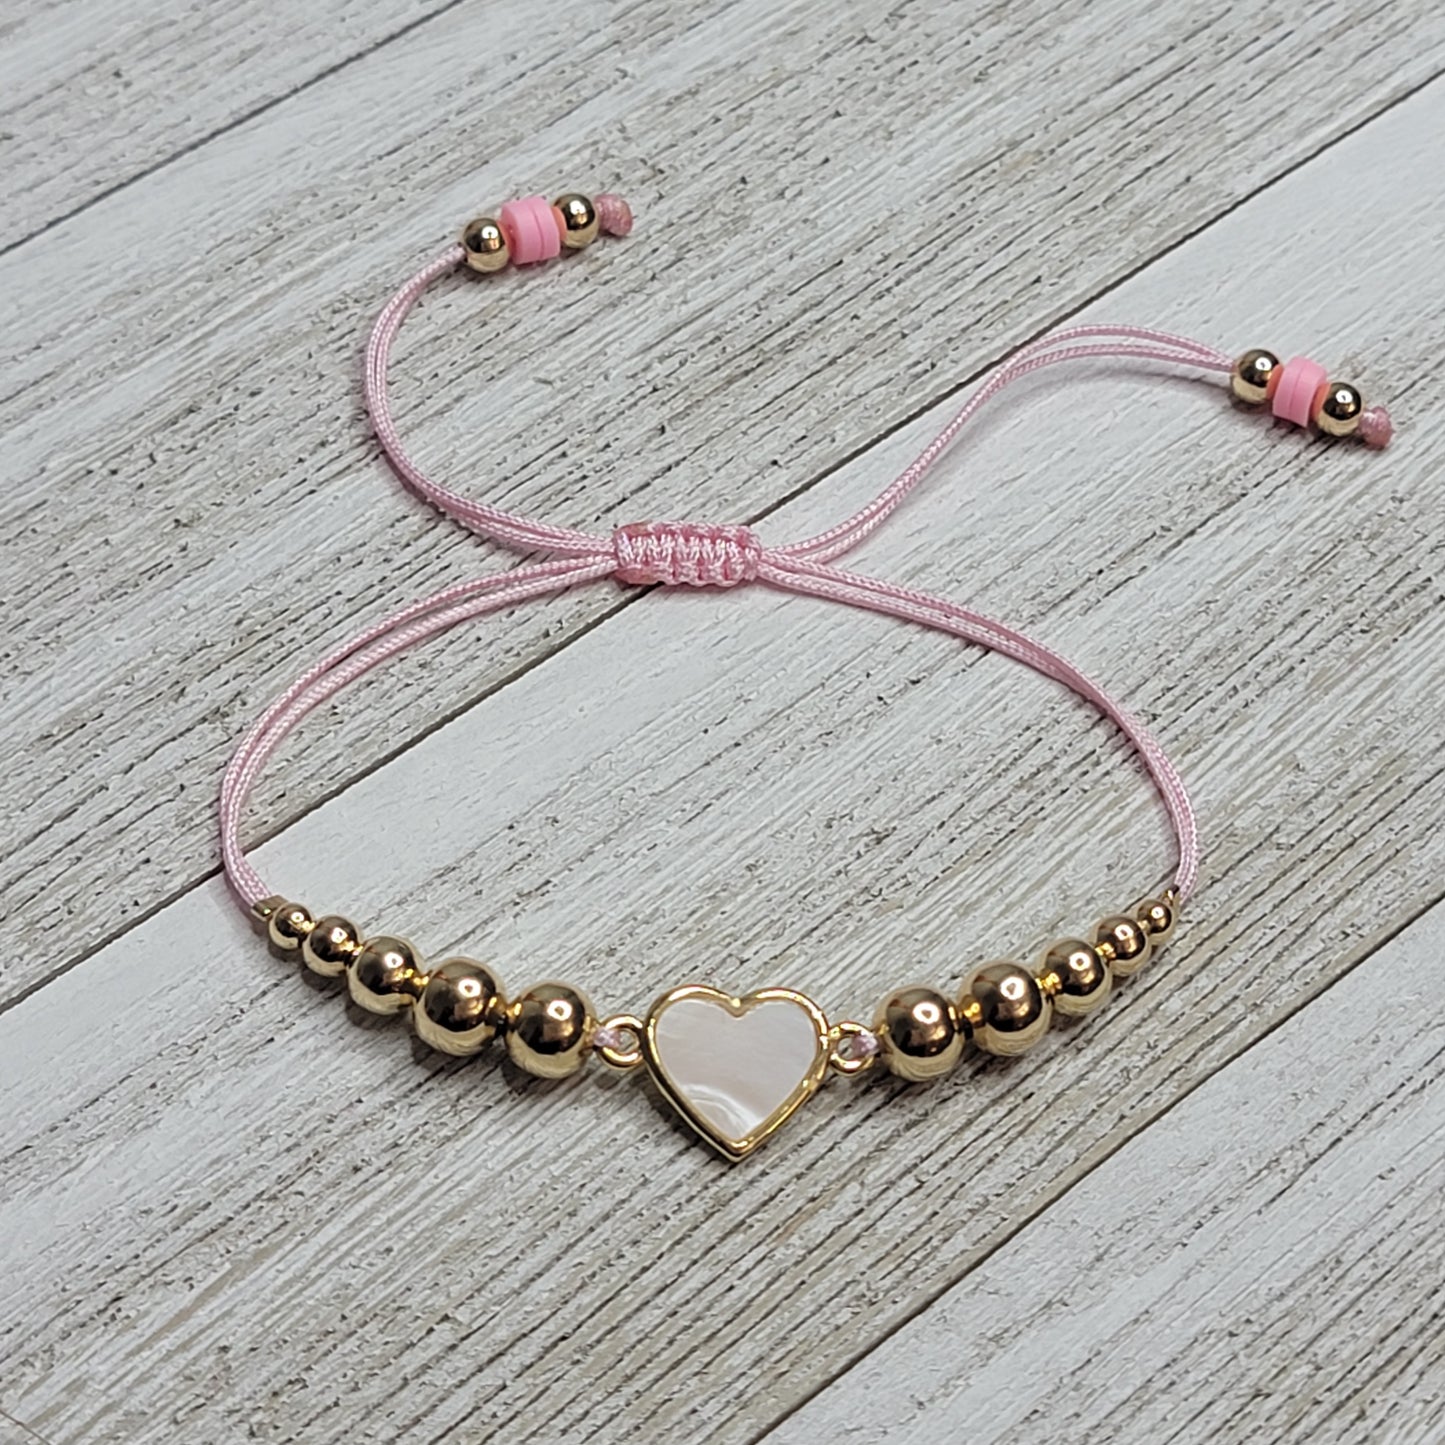 Nacre Heart Adjustable Bracelet / Cord Available in Many Colors